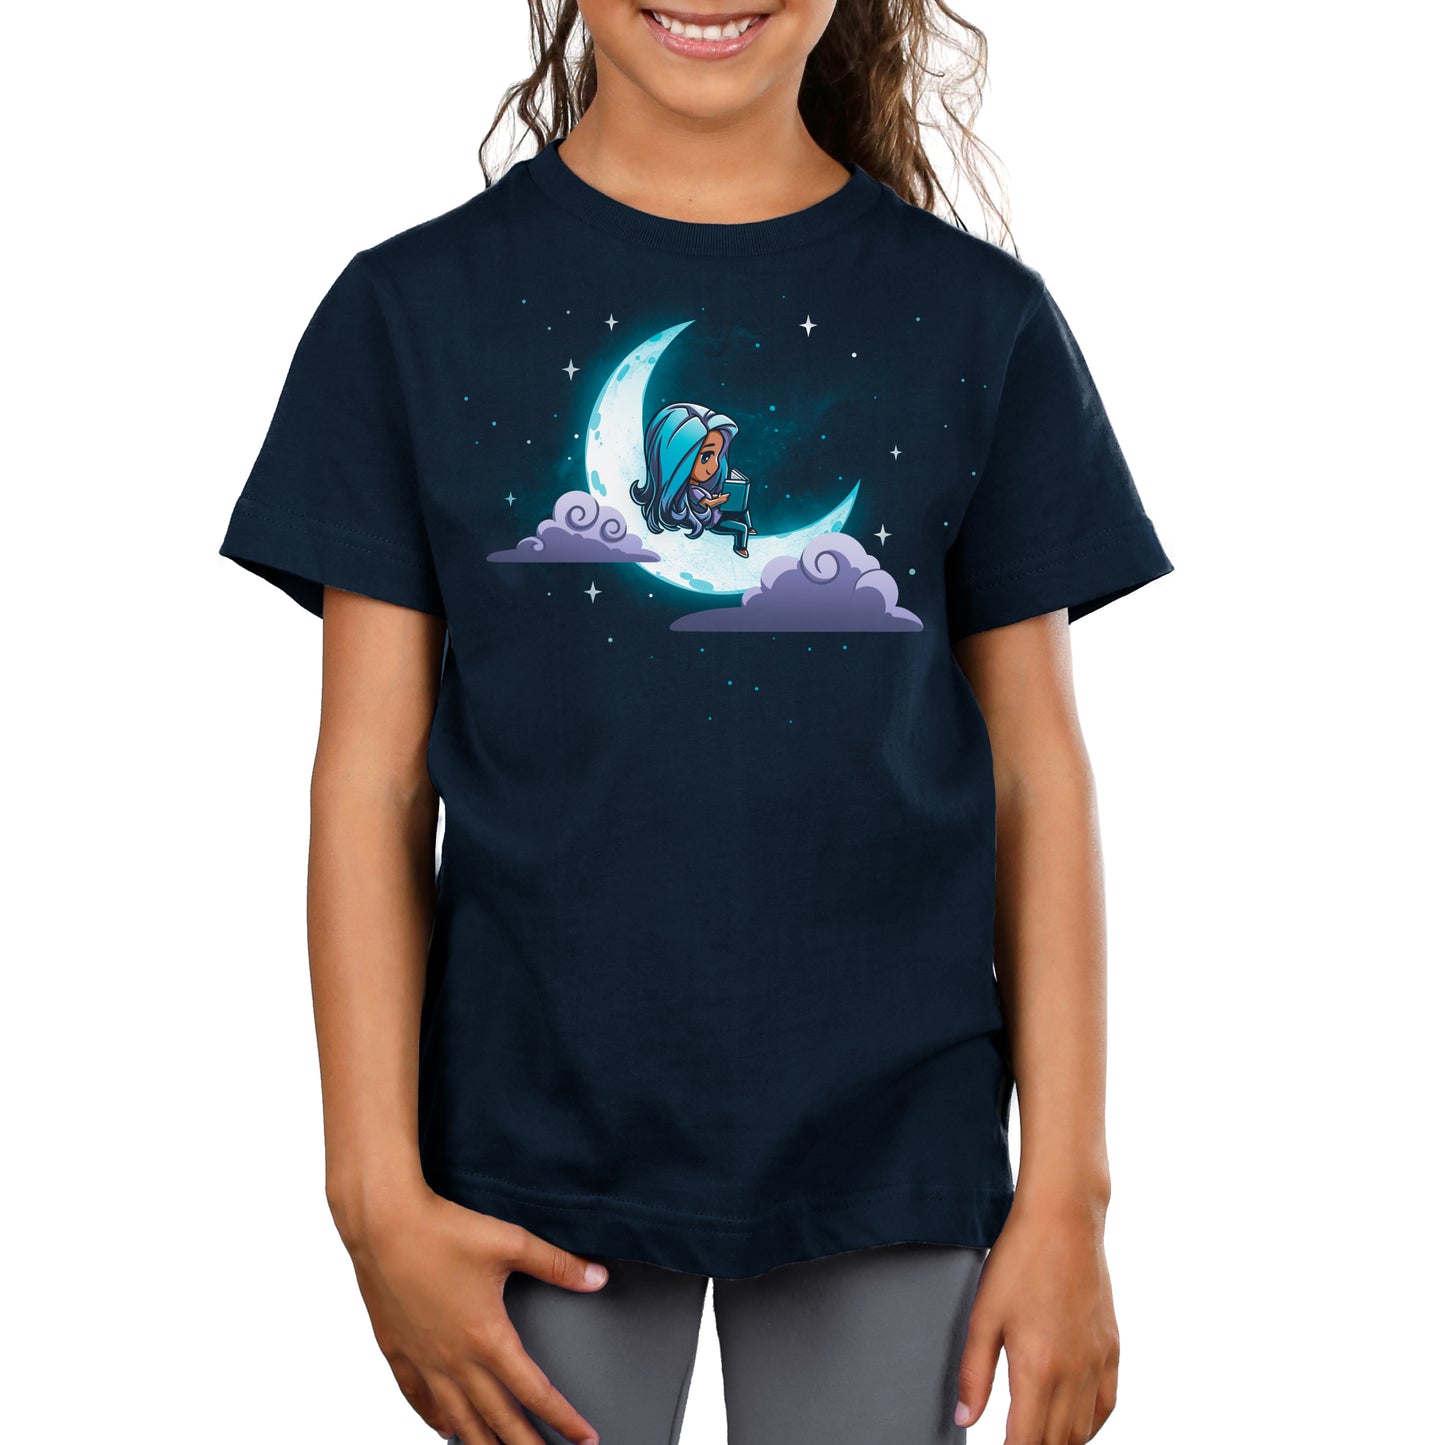 A TeeTurtle bedtime story featuring a girl in a moon-themed t-shirt.